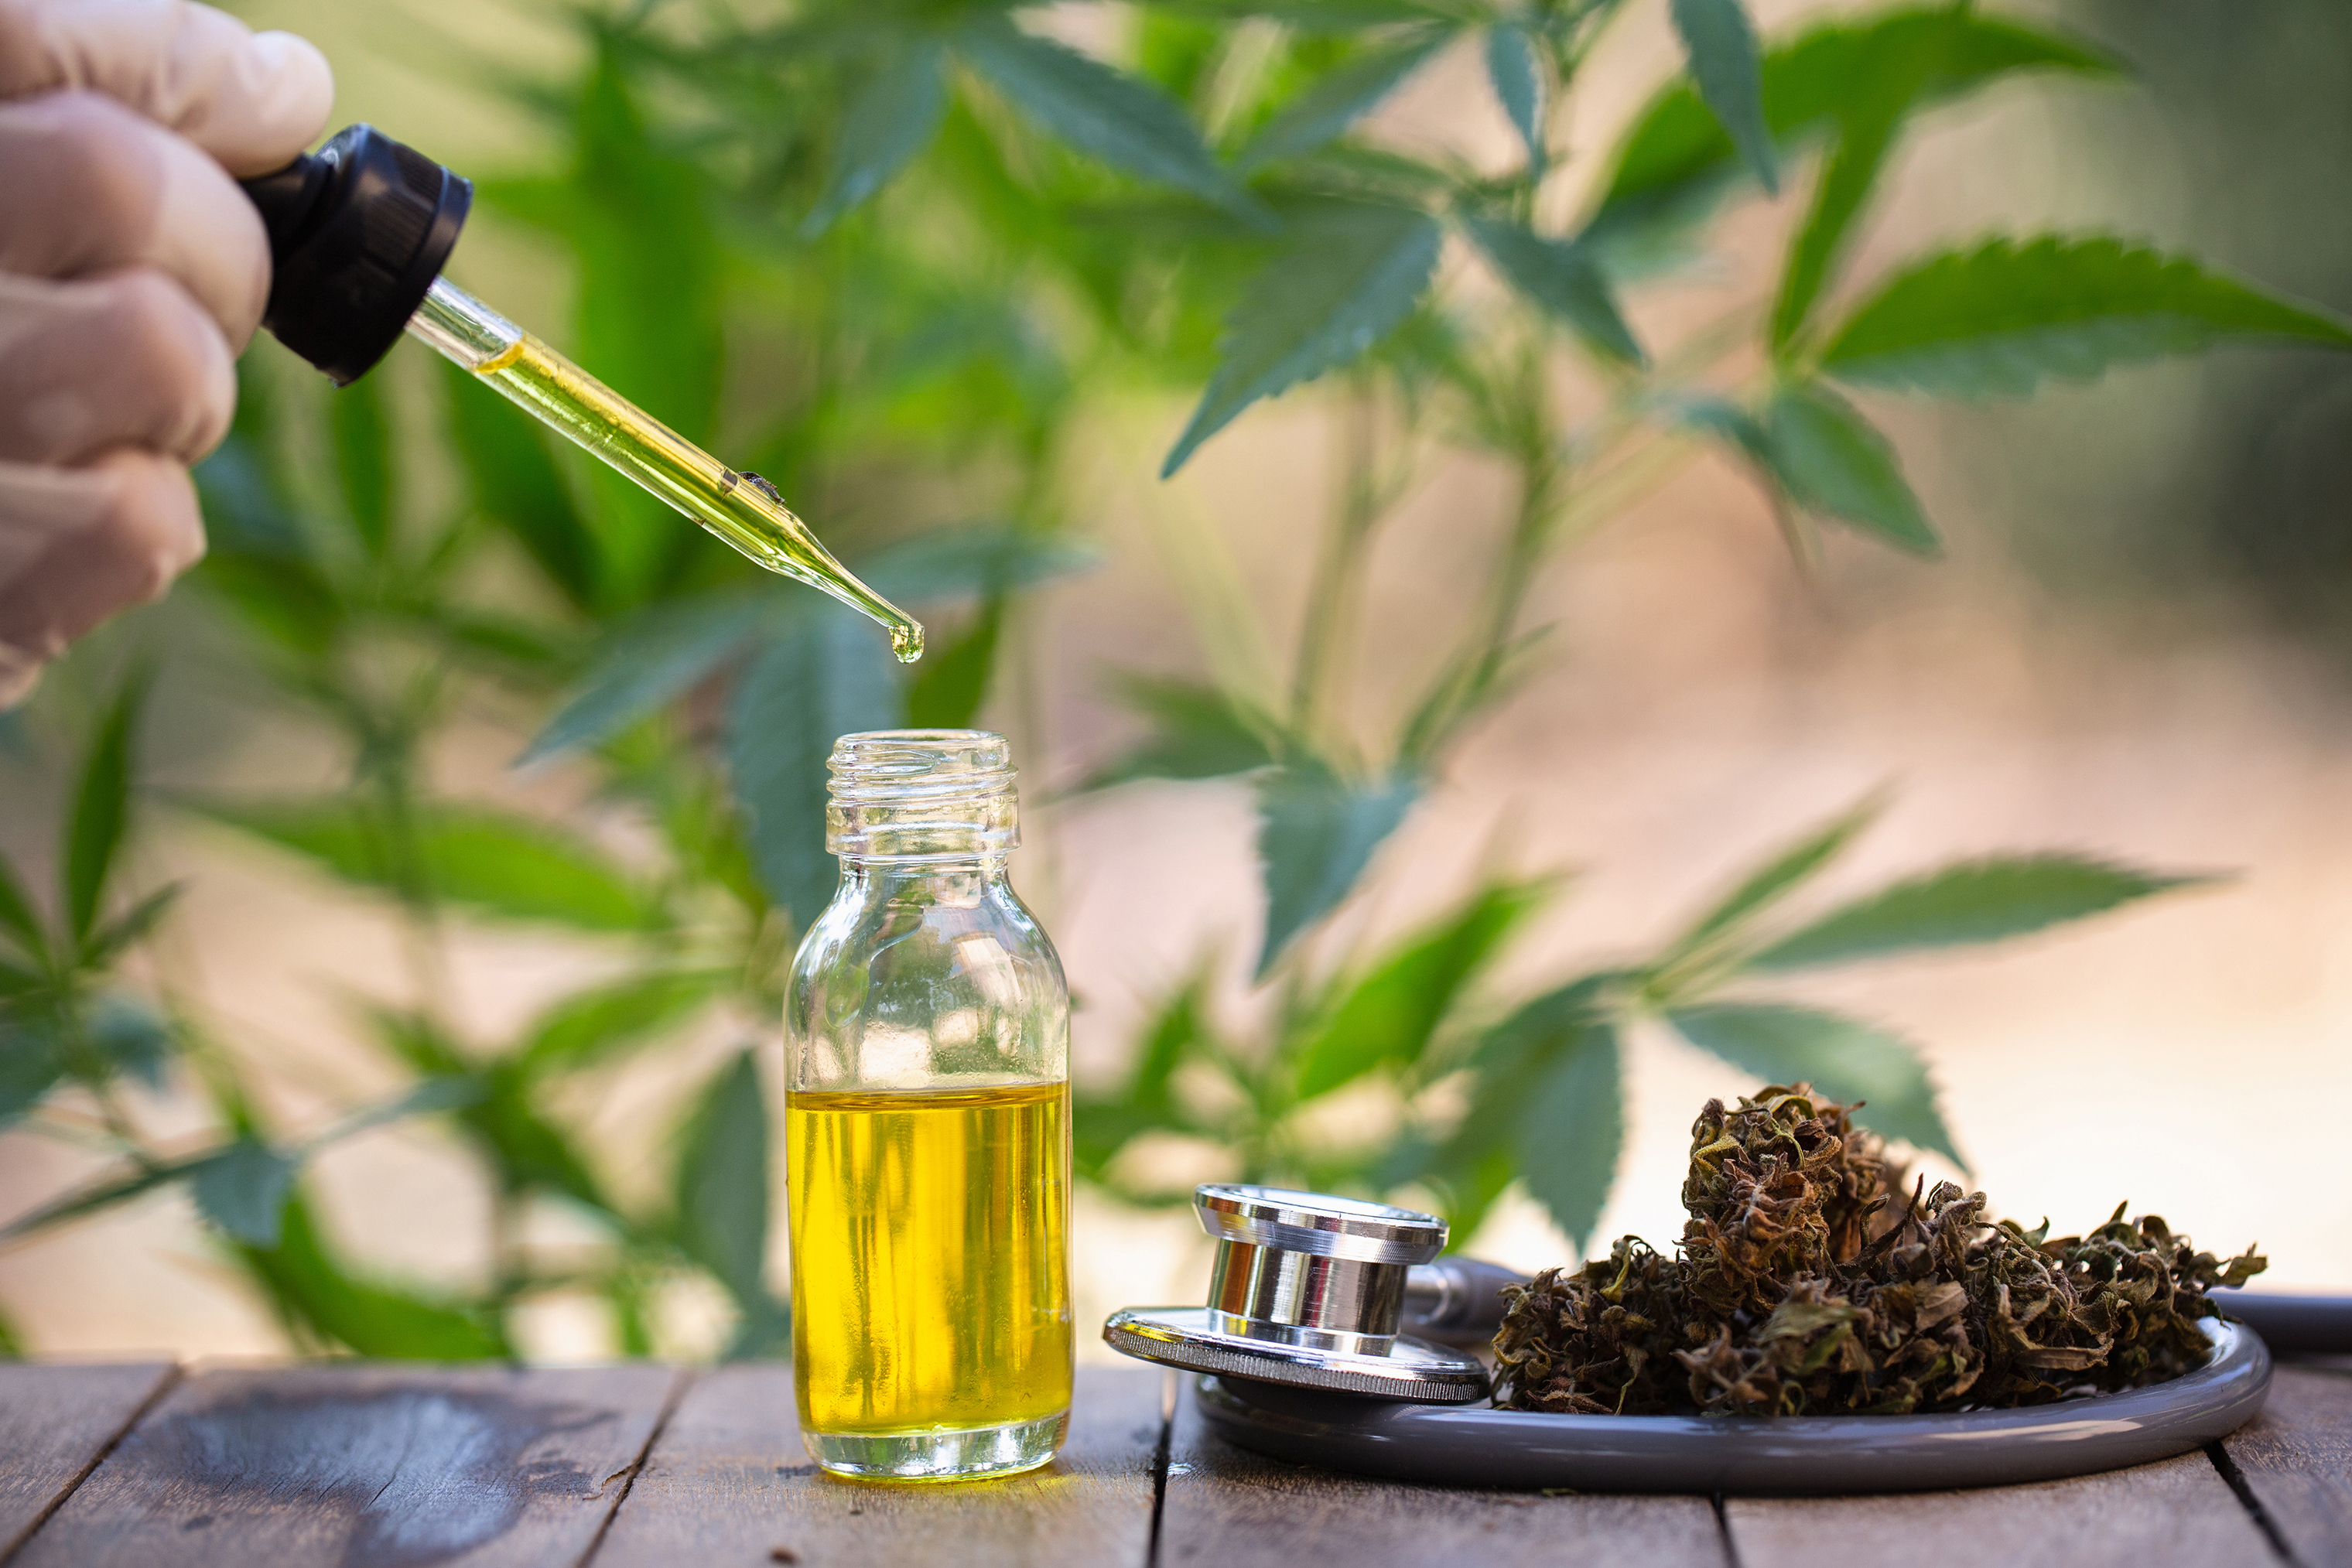 Why Is Cbd Oil Put Under The Tongue - Cbd|Oil|Cannabidiol|Products|View|Abstract|Effects|Hemp|Cannabis|Product|Thc|Pain|People|Health|Body|Plant|Cannabinoids|Medications|Oils|Drug|Benefits|System|Study|Marijuana|Anxiety|Side|Research|Effect|Liver|Quality|Treatment|Studies|Epilepsy|Symptoms|Gummies|Compounds|Dose|Time|Inflammation|Bottle|Cbd Oil|View Abstract|Side Effects|Cbd Products|Endocannabinoid System|Multiple Sclerosis|Cbd Oils|Cbd Gummies|Cannabis Plant|Hemp Oil|Cbd Product|Hemp Plant|United States|Cytochrome P450|Many People|Chronic Pain|Nuleaf Naturals|Royal Cbd|Full-Spectrum Cbd Oil|Drug Administration|Cbd Oil Products|Medical Marijuana|Drug Test|Heavy Metals|Clinical Trial|Clinical Trials|Cbd Oil Side|Rating Highlights|Wide Variety|Animal Studies